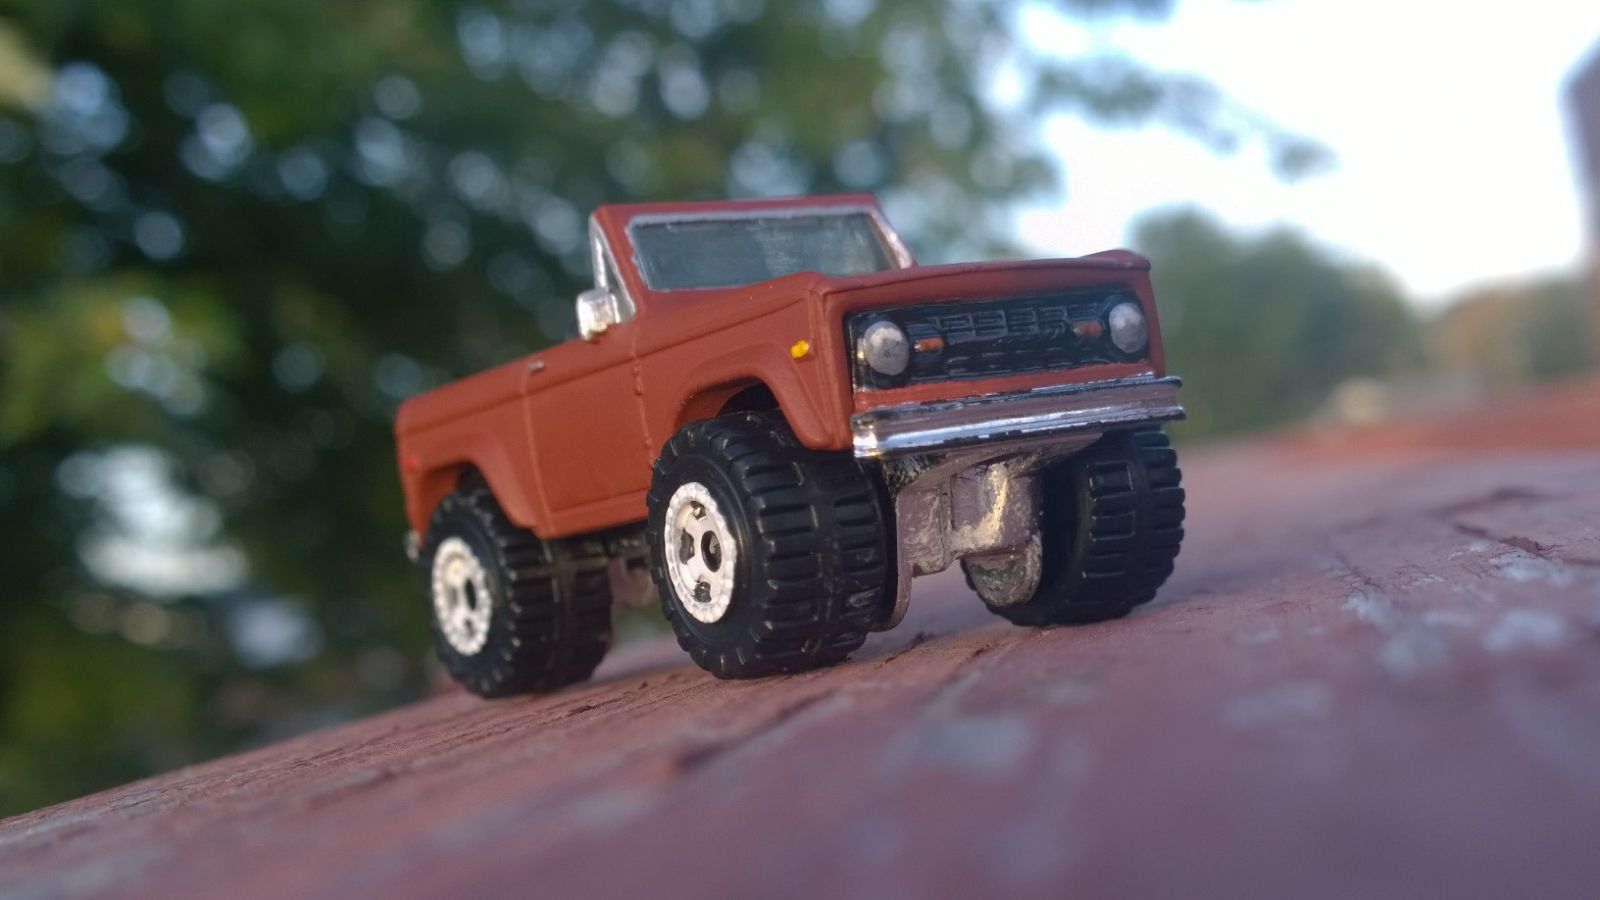 Illustration for article titled CUSTOM! 1973 Bronco clone!